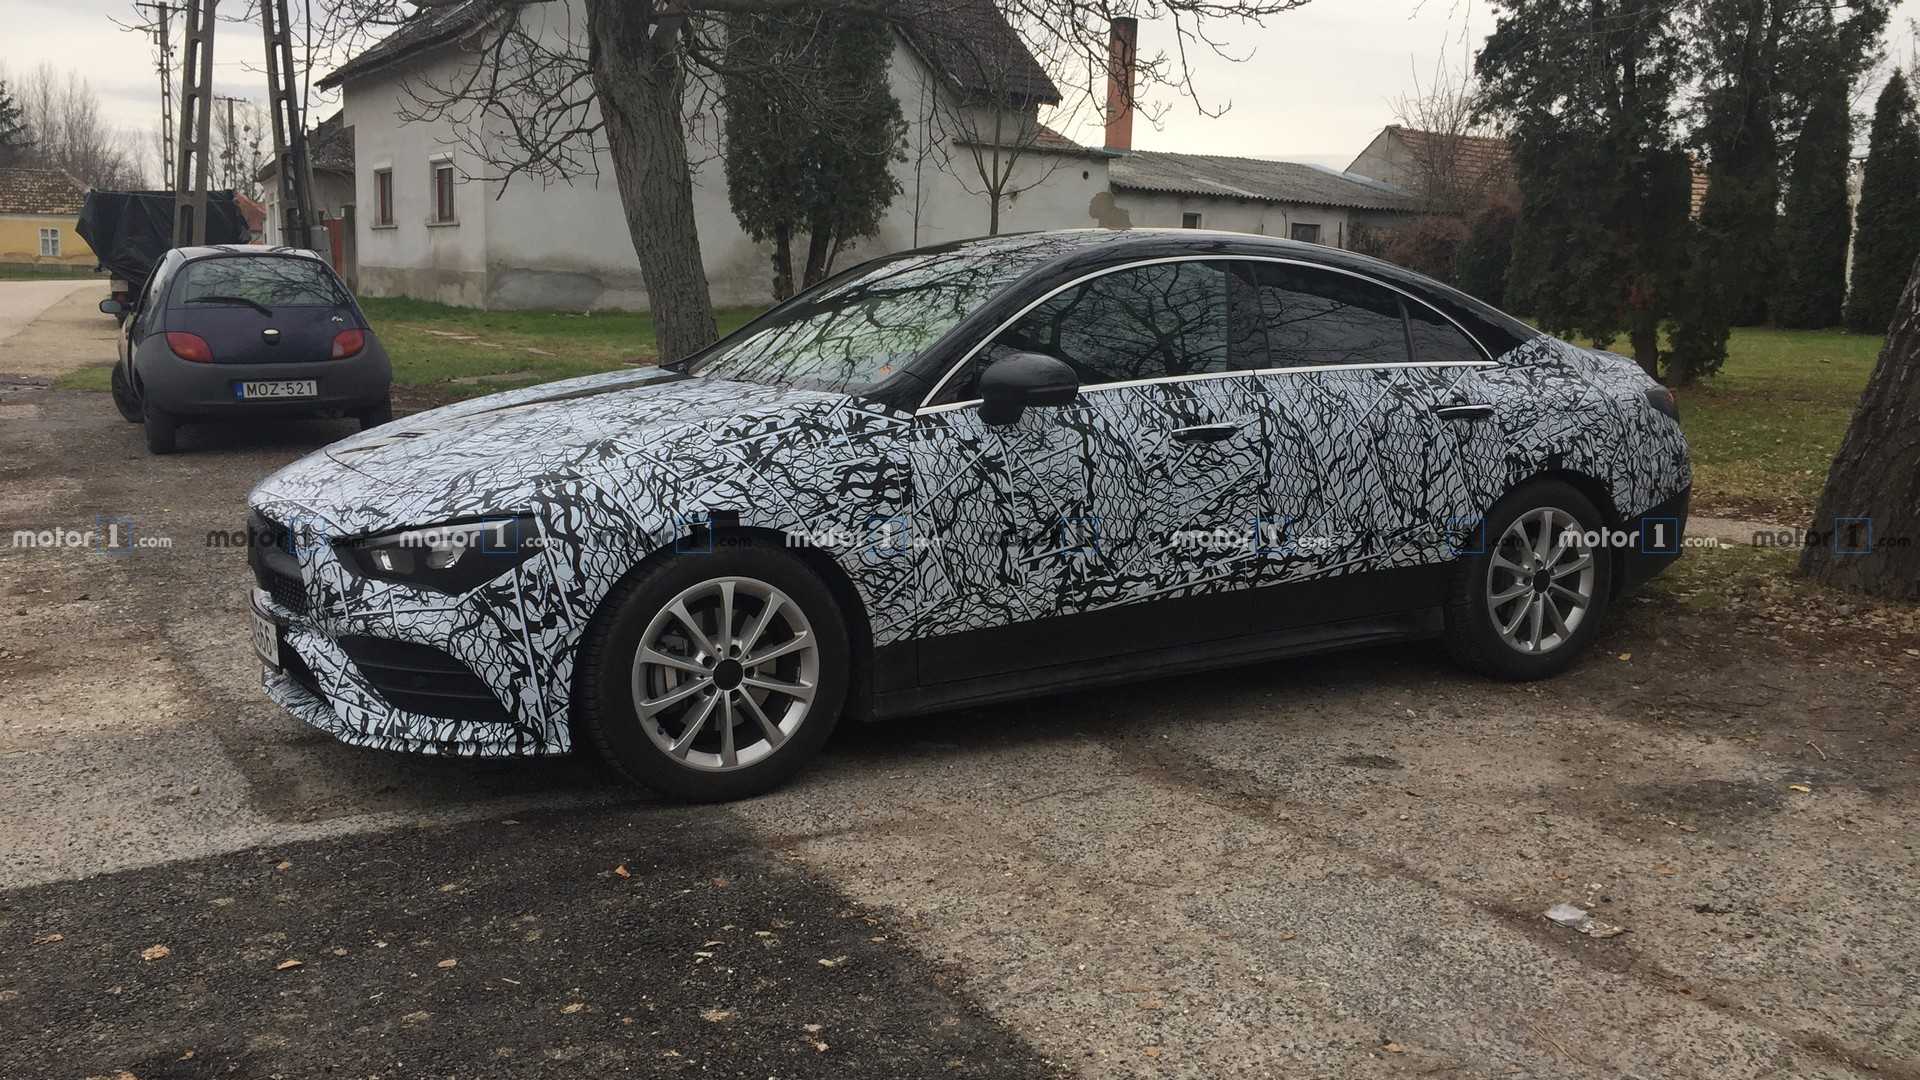 Mercedes CLA Spied Inside And Out By Motor1.com Reader